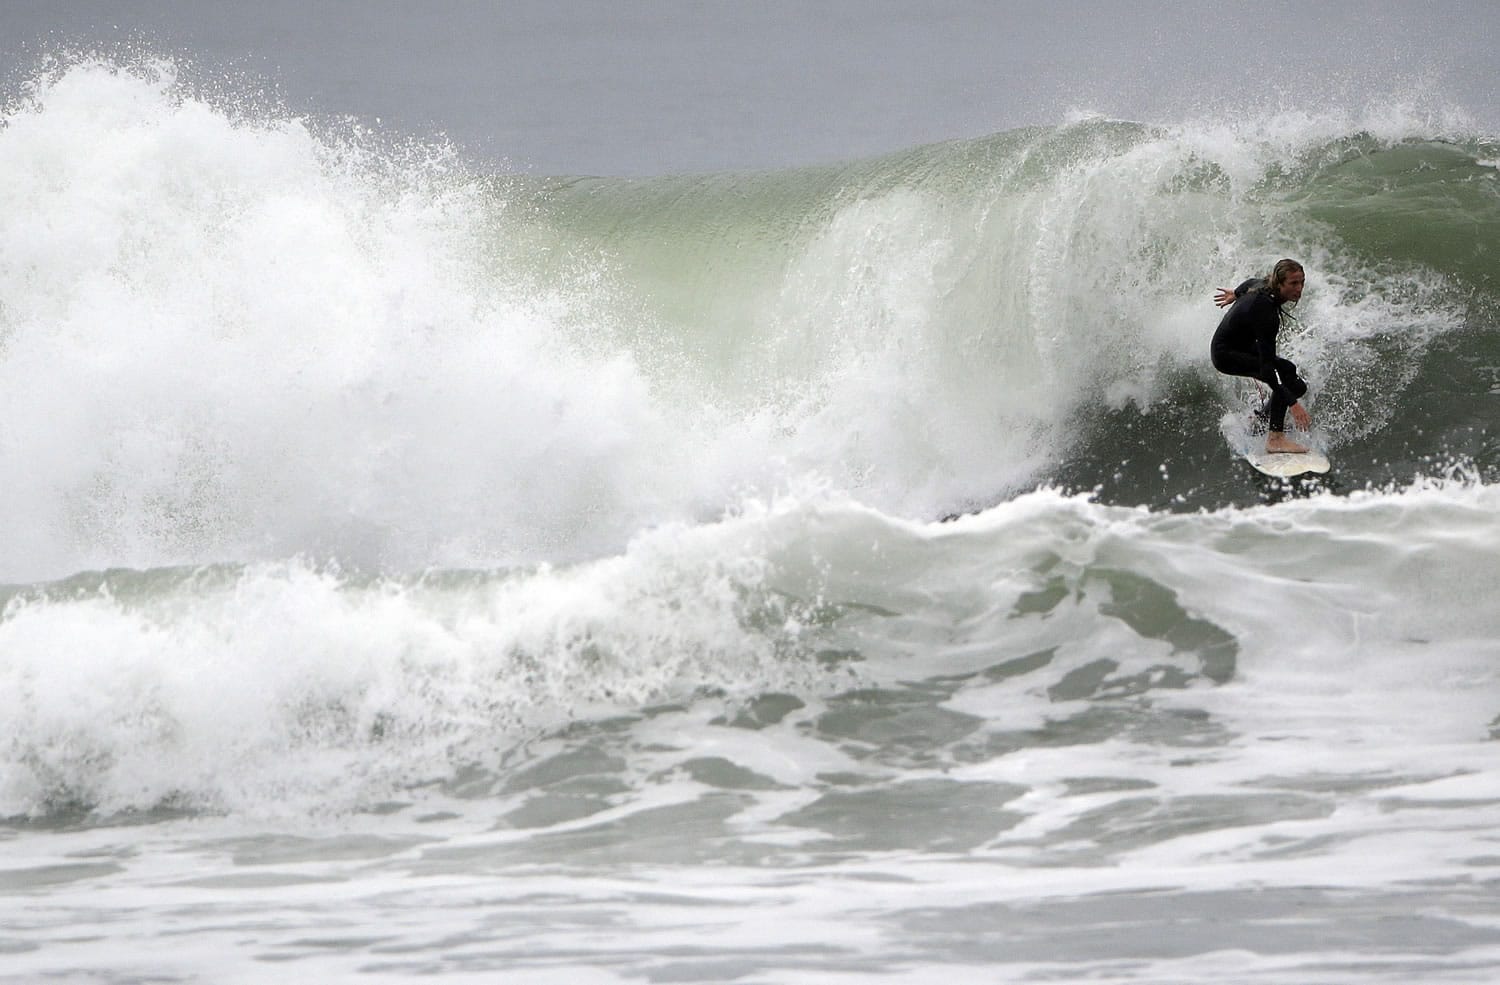 A surfer negotiates a wave Tuesday at Ocean Beach in San Francisco. Coastal flood advisories were issued for parts of the California coast, while high surf advisories go into effect today.